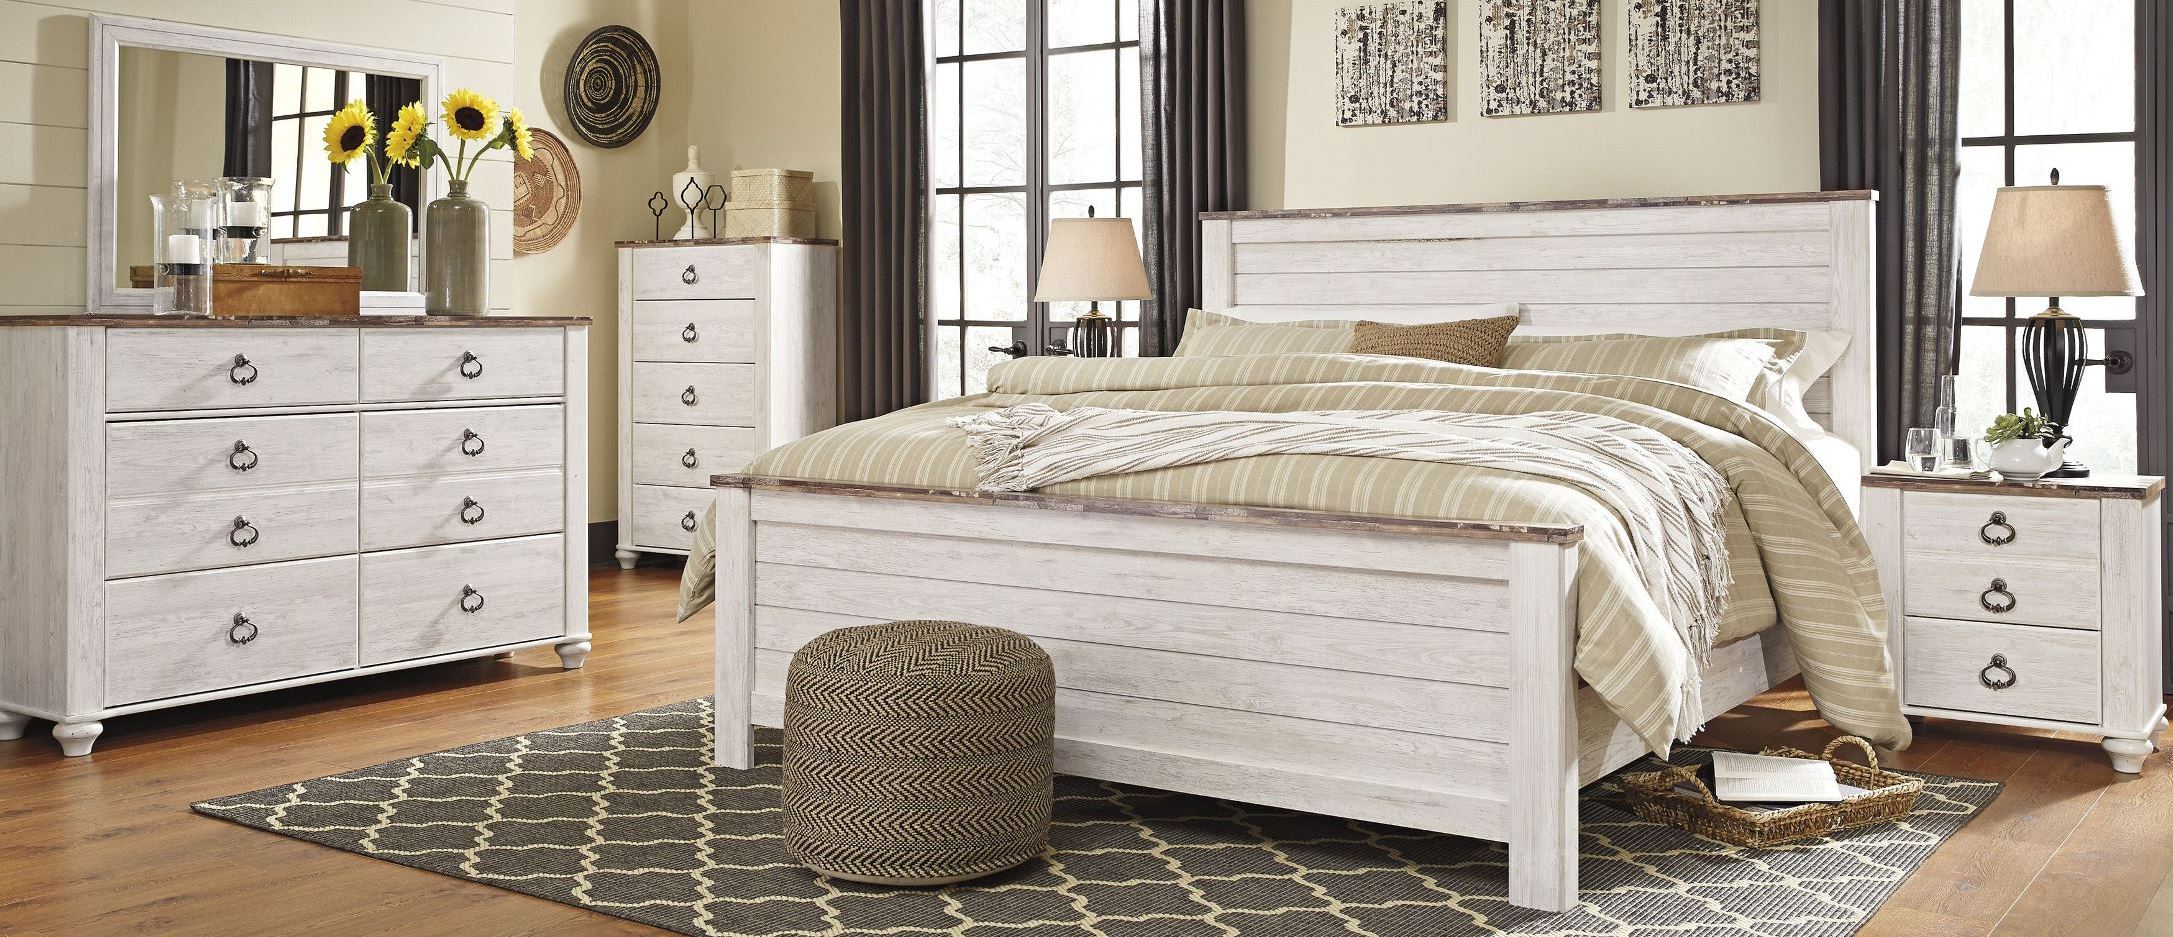 Bedroom White Washed Bedroom Furniture Wonderful On For Willowton Whitewash Panel Set Sets Cheap 0 White Washed Bedroom Furniture